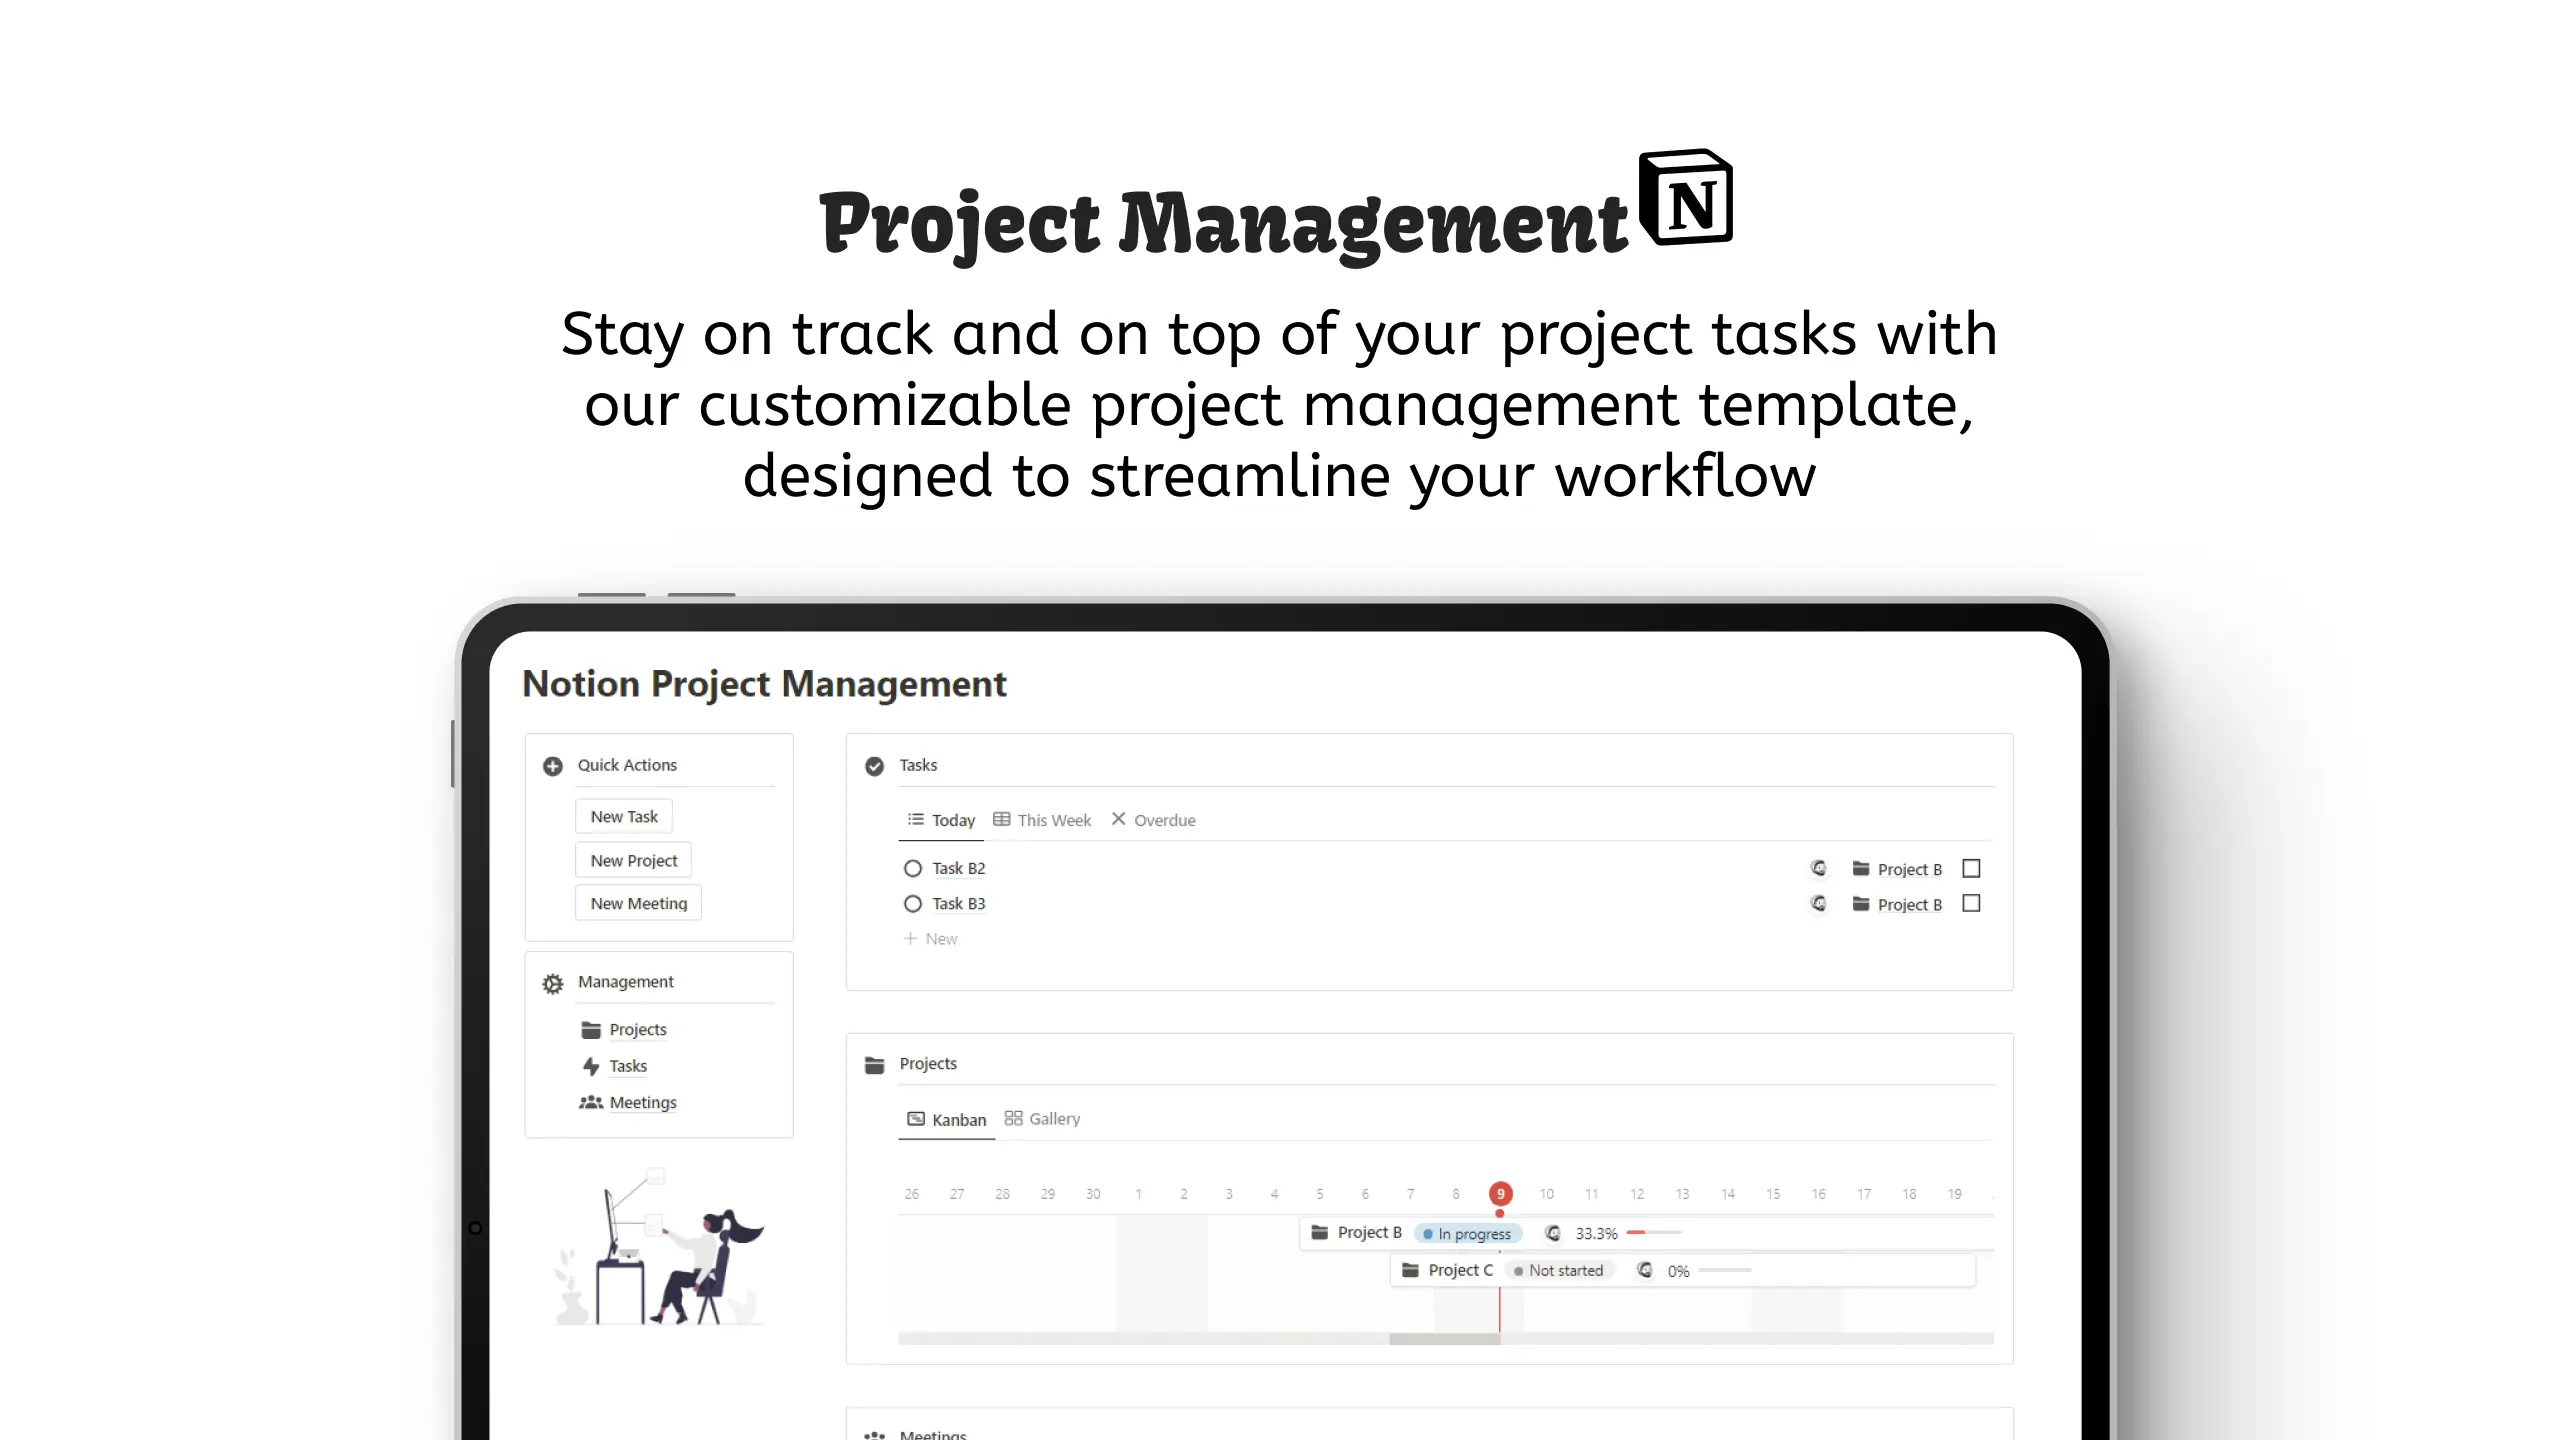 Project Management Template image